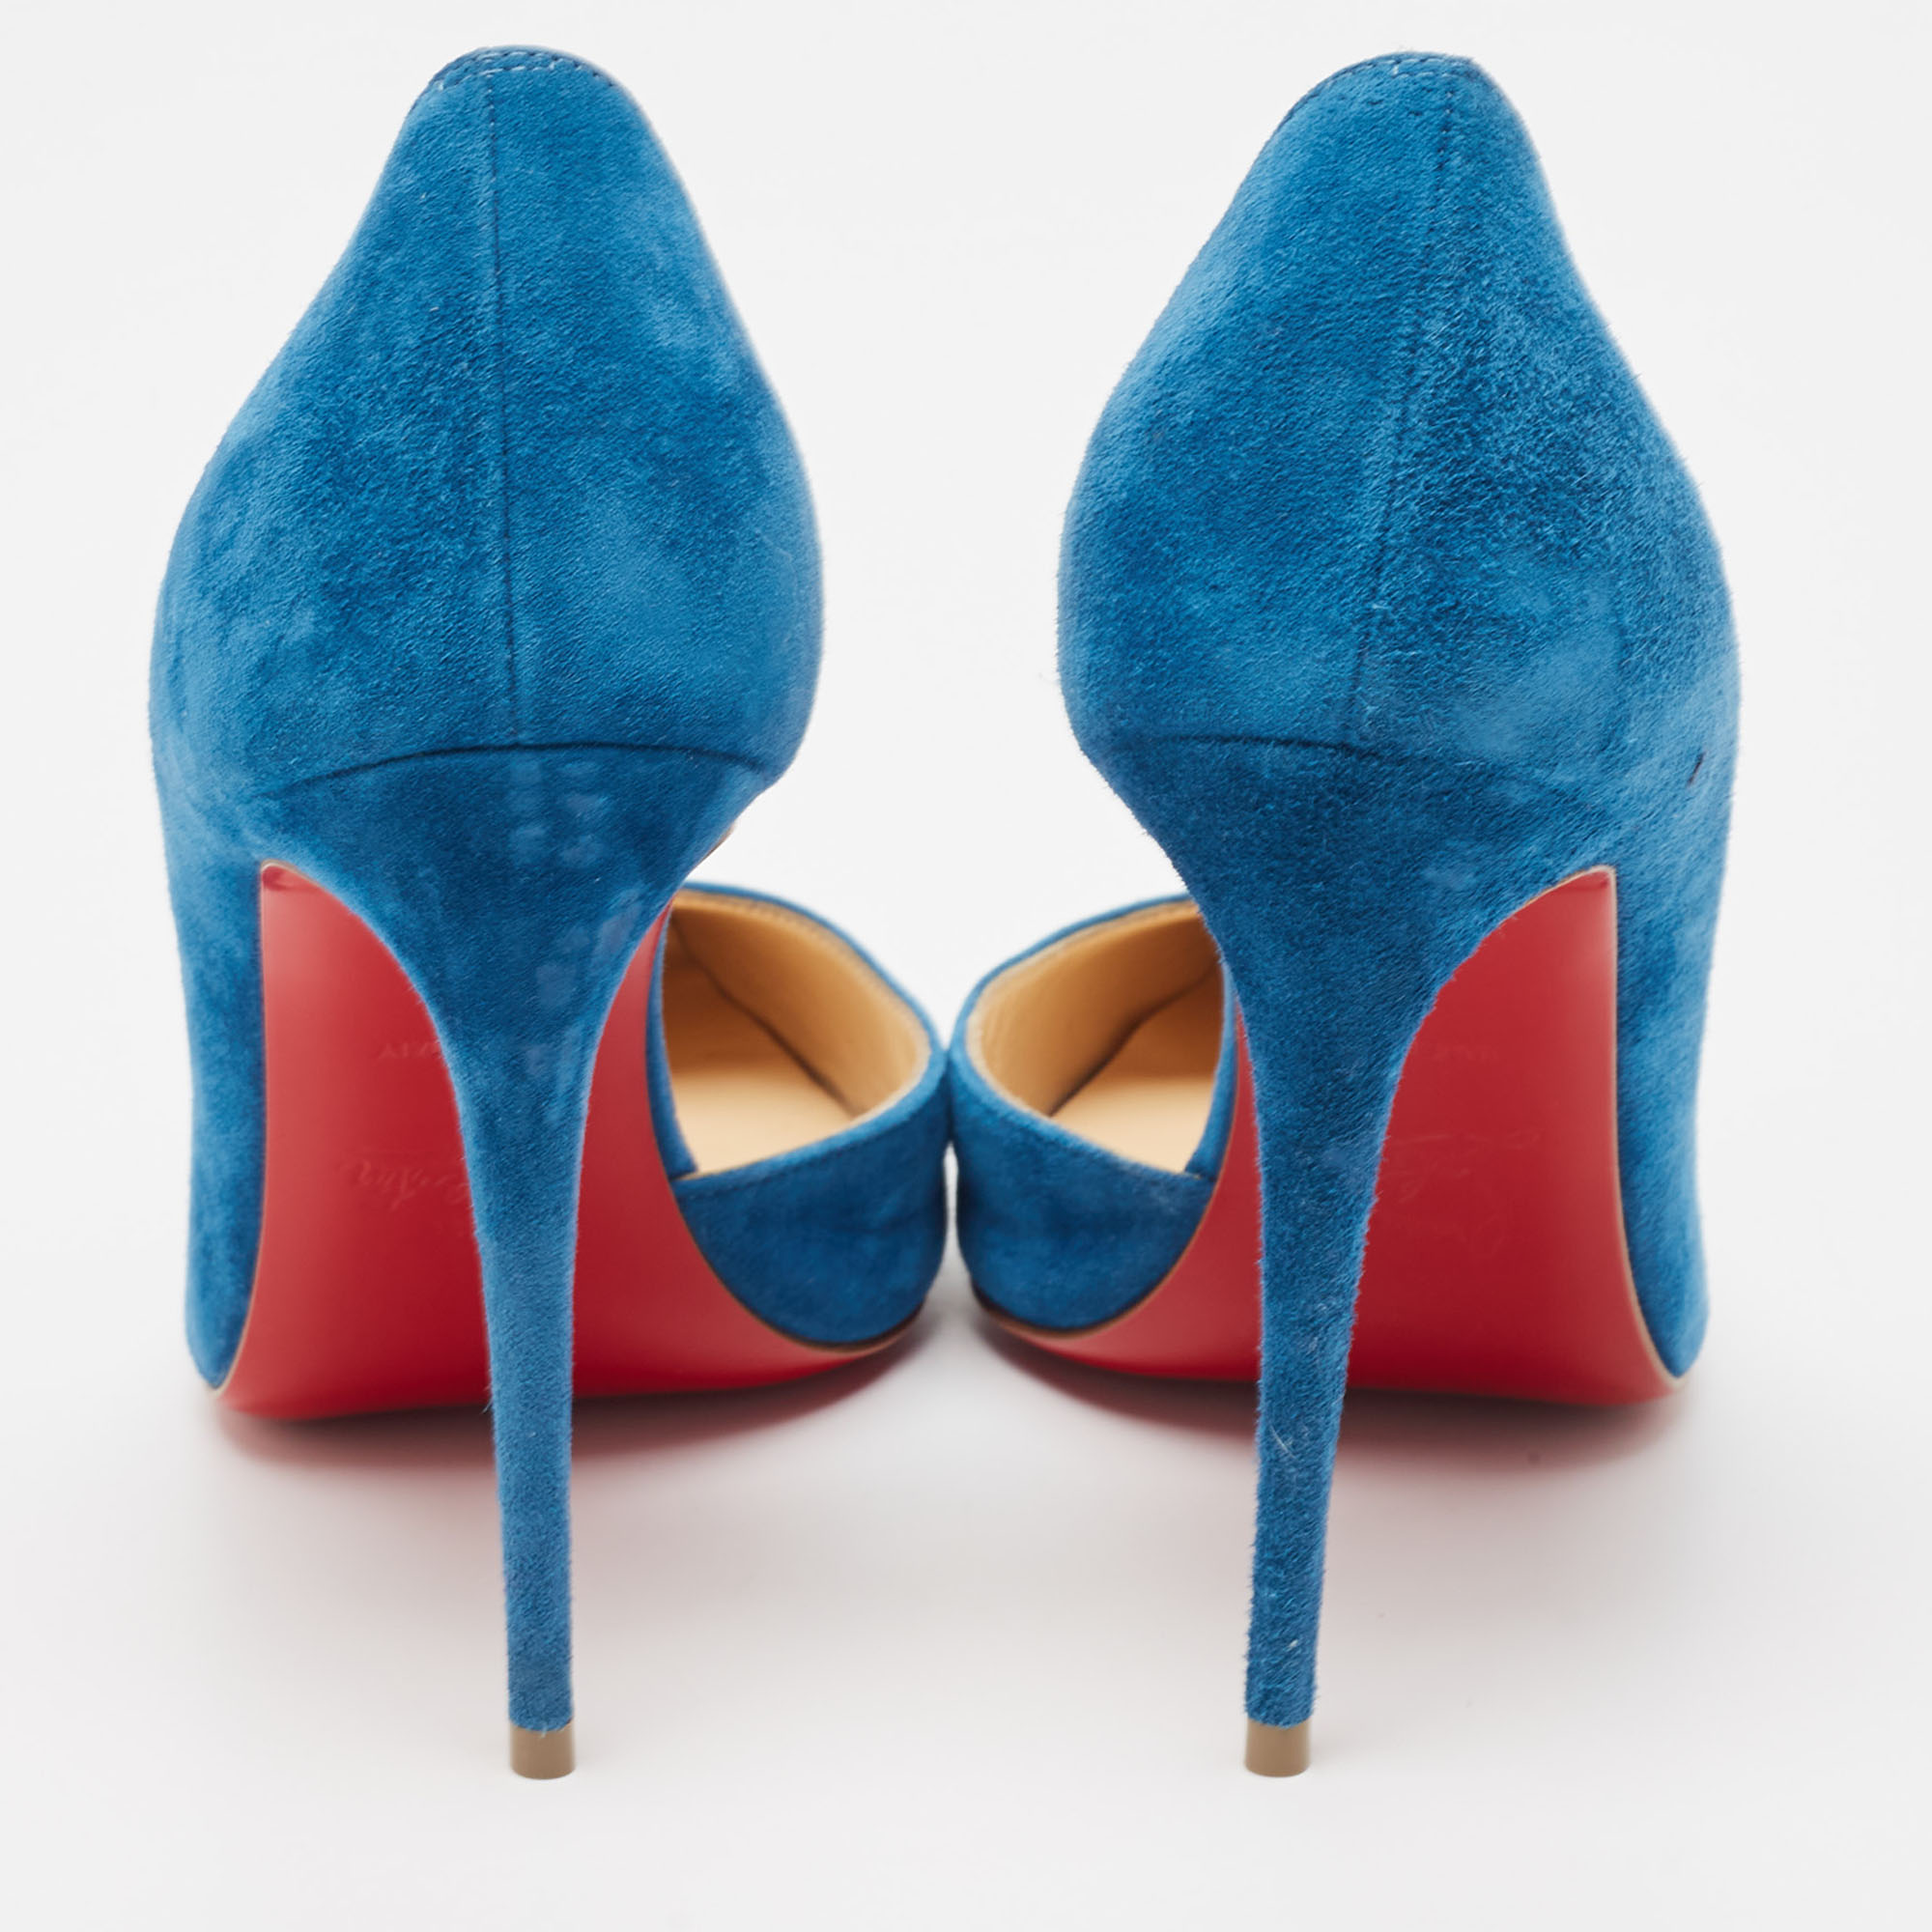 Christian Louboutin Blue Suede  Pointed Toe Dorsay Pumps Size 36